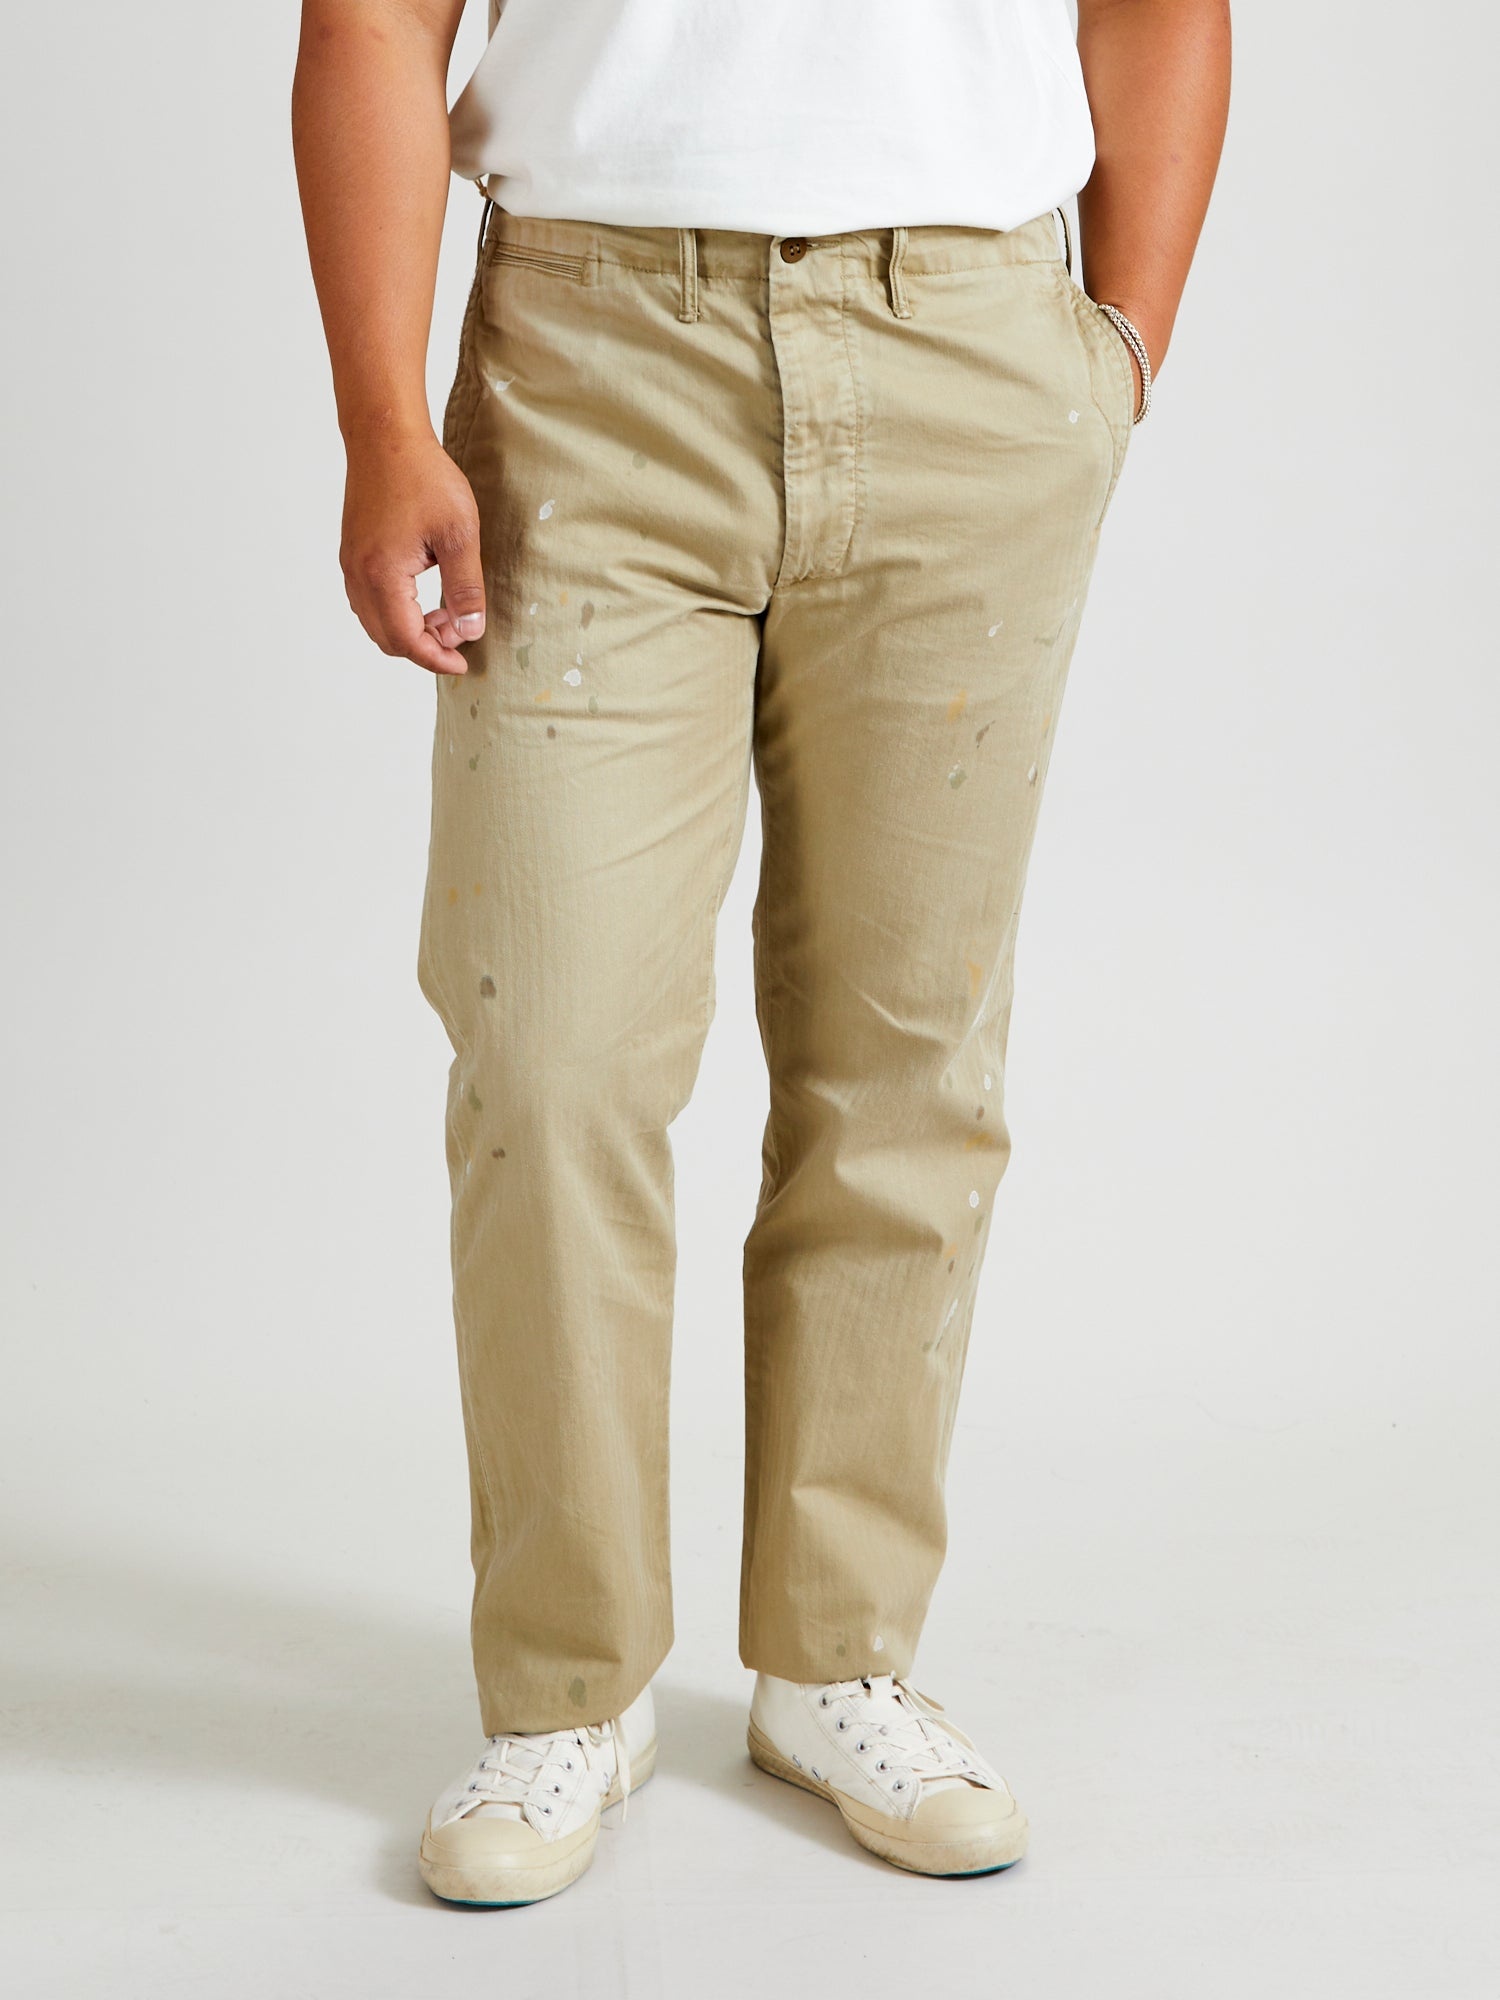 Officer Chino Pants in Vintage Khaki - 2